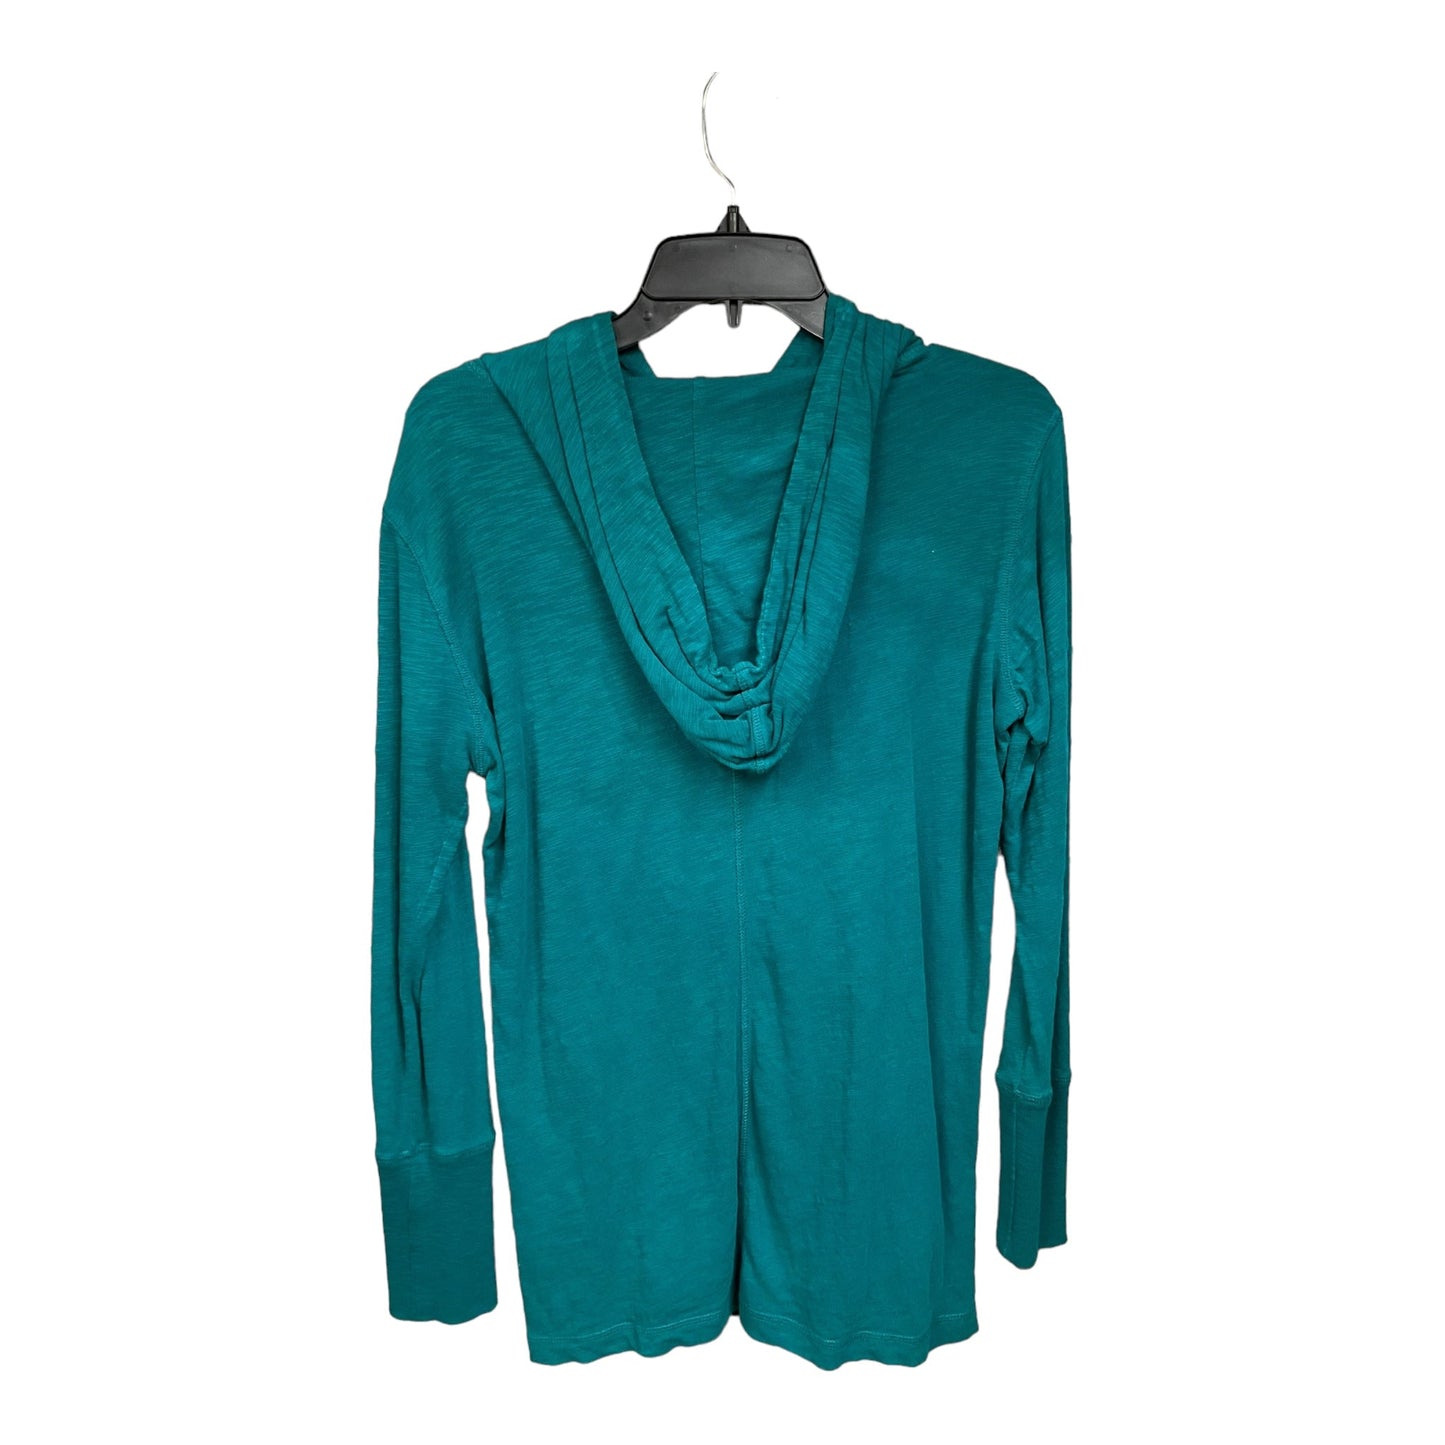 Turquoise Top Long Sleeve Jag, Size Petite   Small